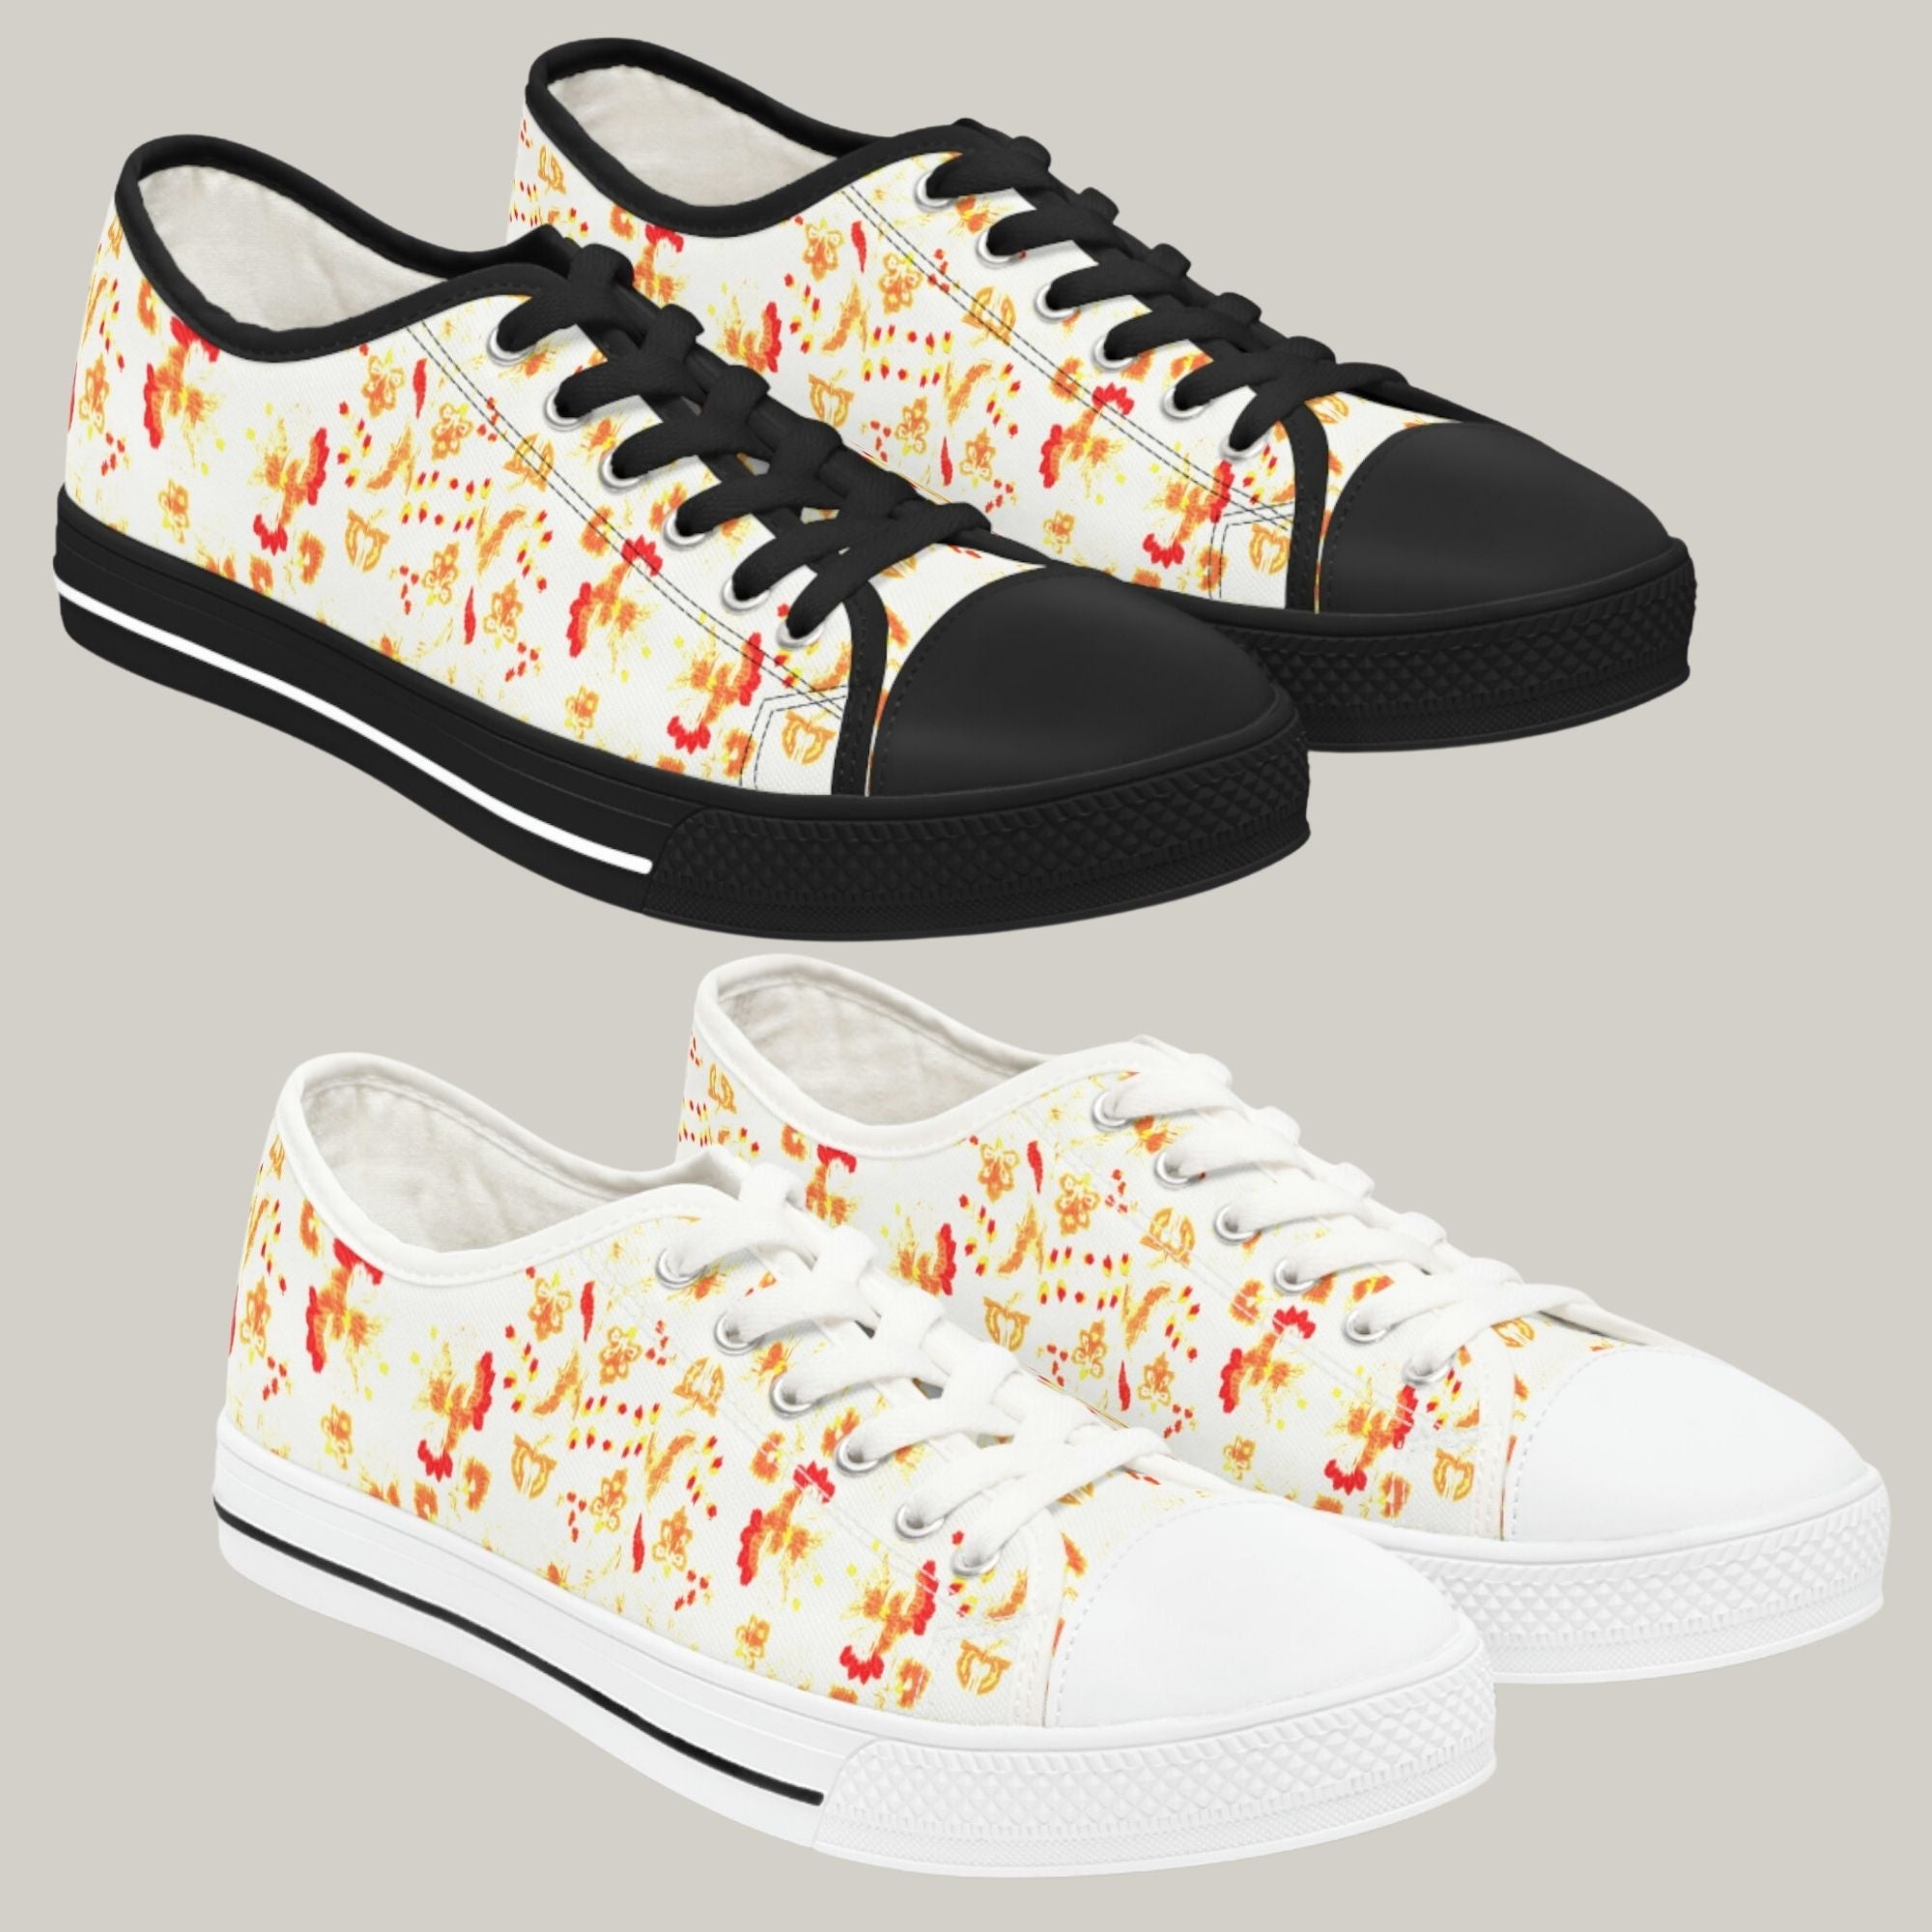 ORANGE FLORAL - Women's Low Top Sneakers Black and White Sole